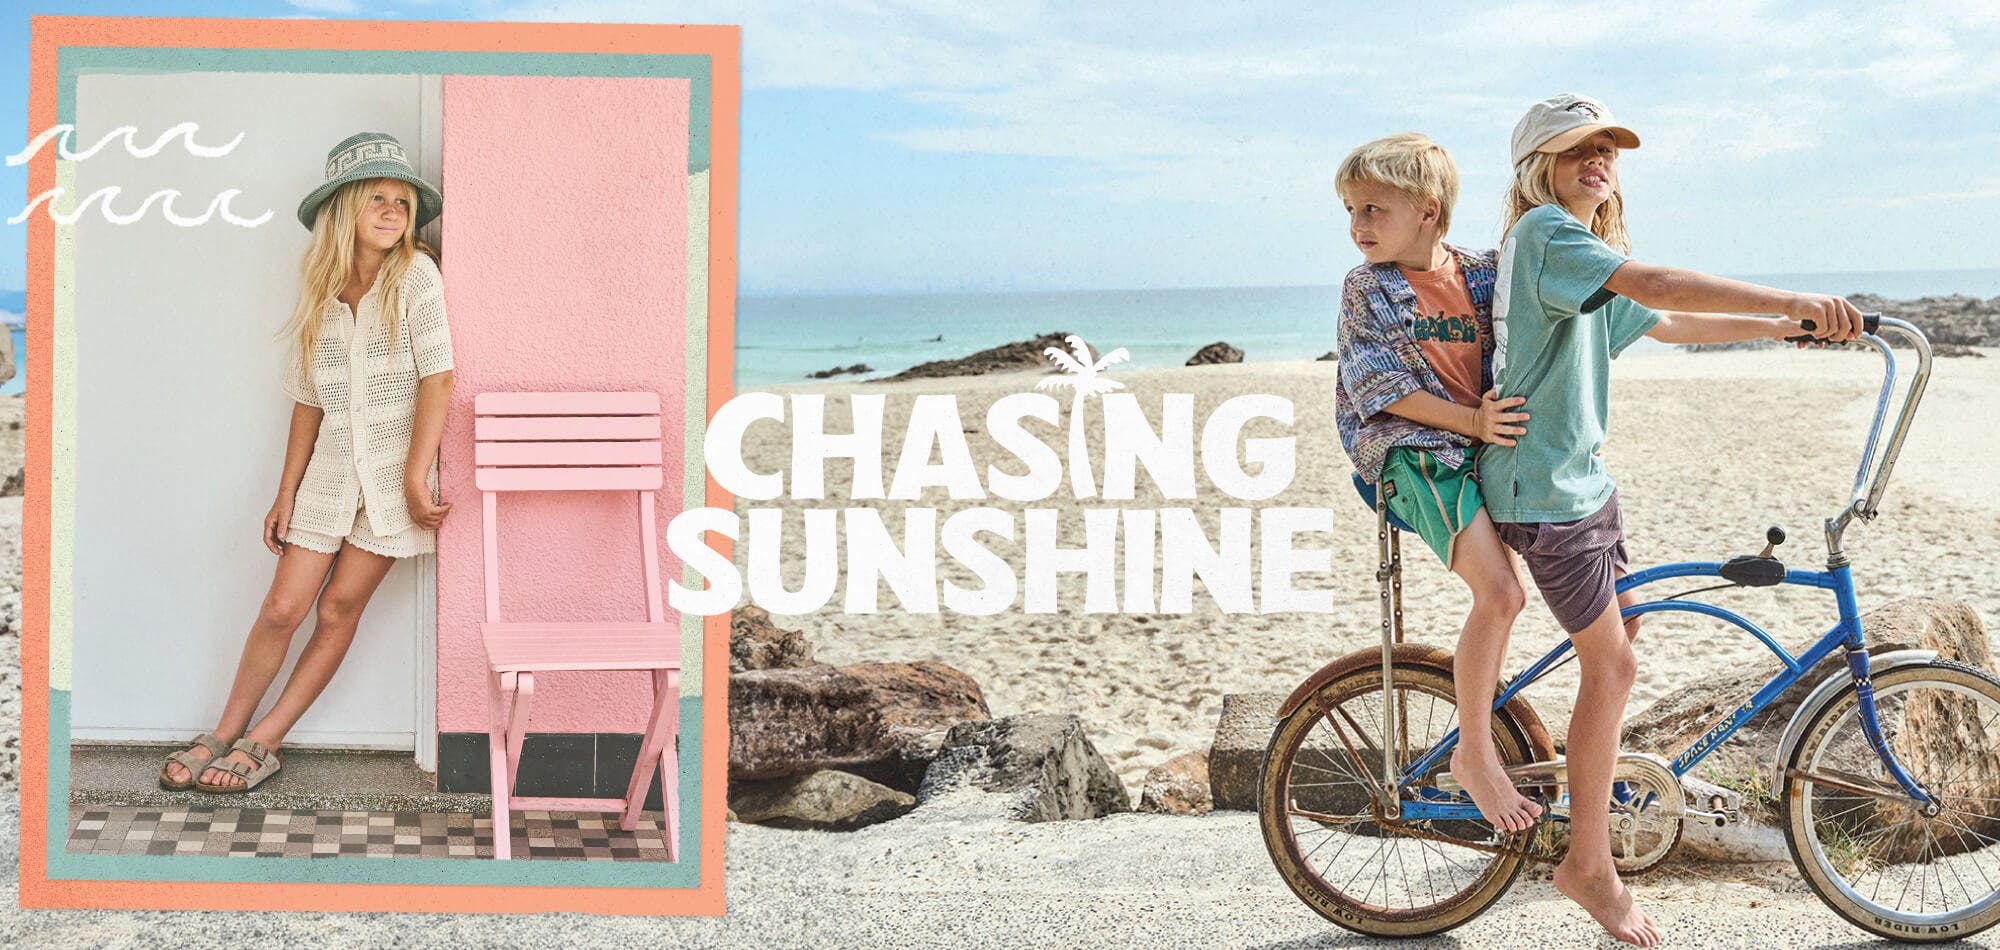 Chasing Sunshine, kids homepage, two boys riding a vintage blue bike at the beach, you girls wearing knitted set near pink wall.